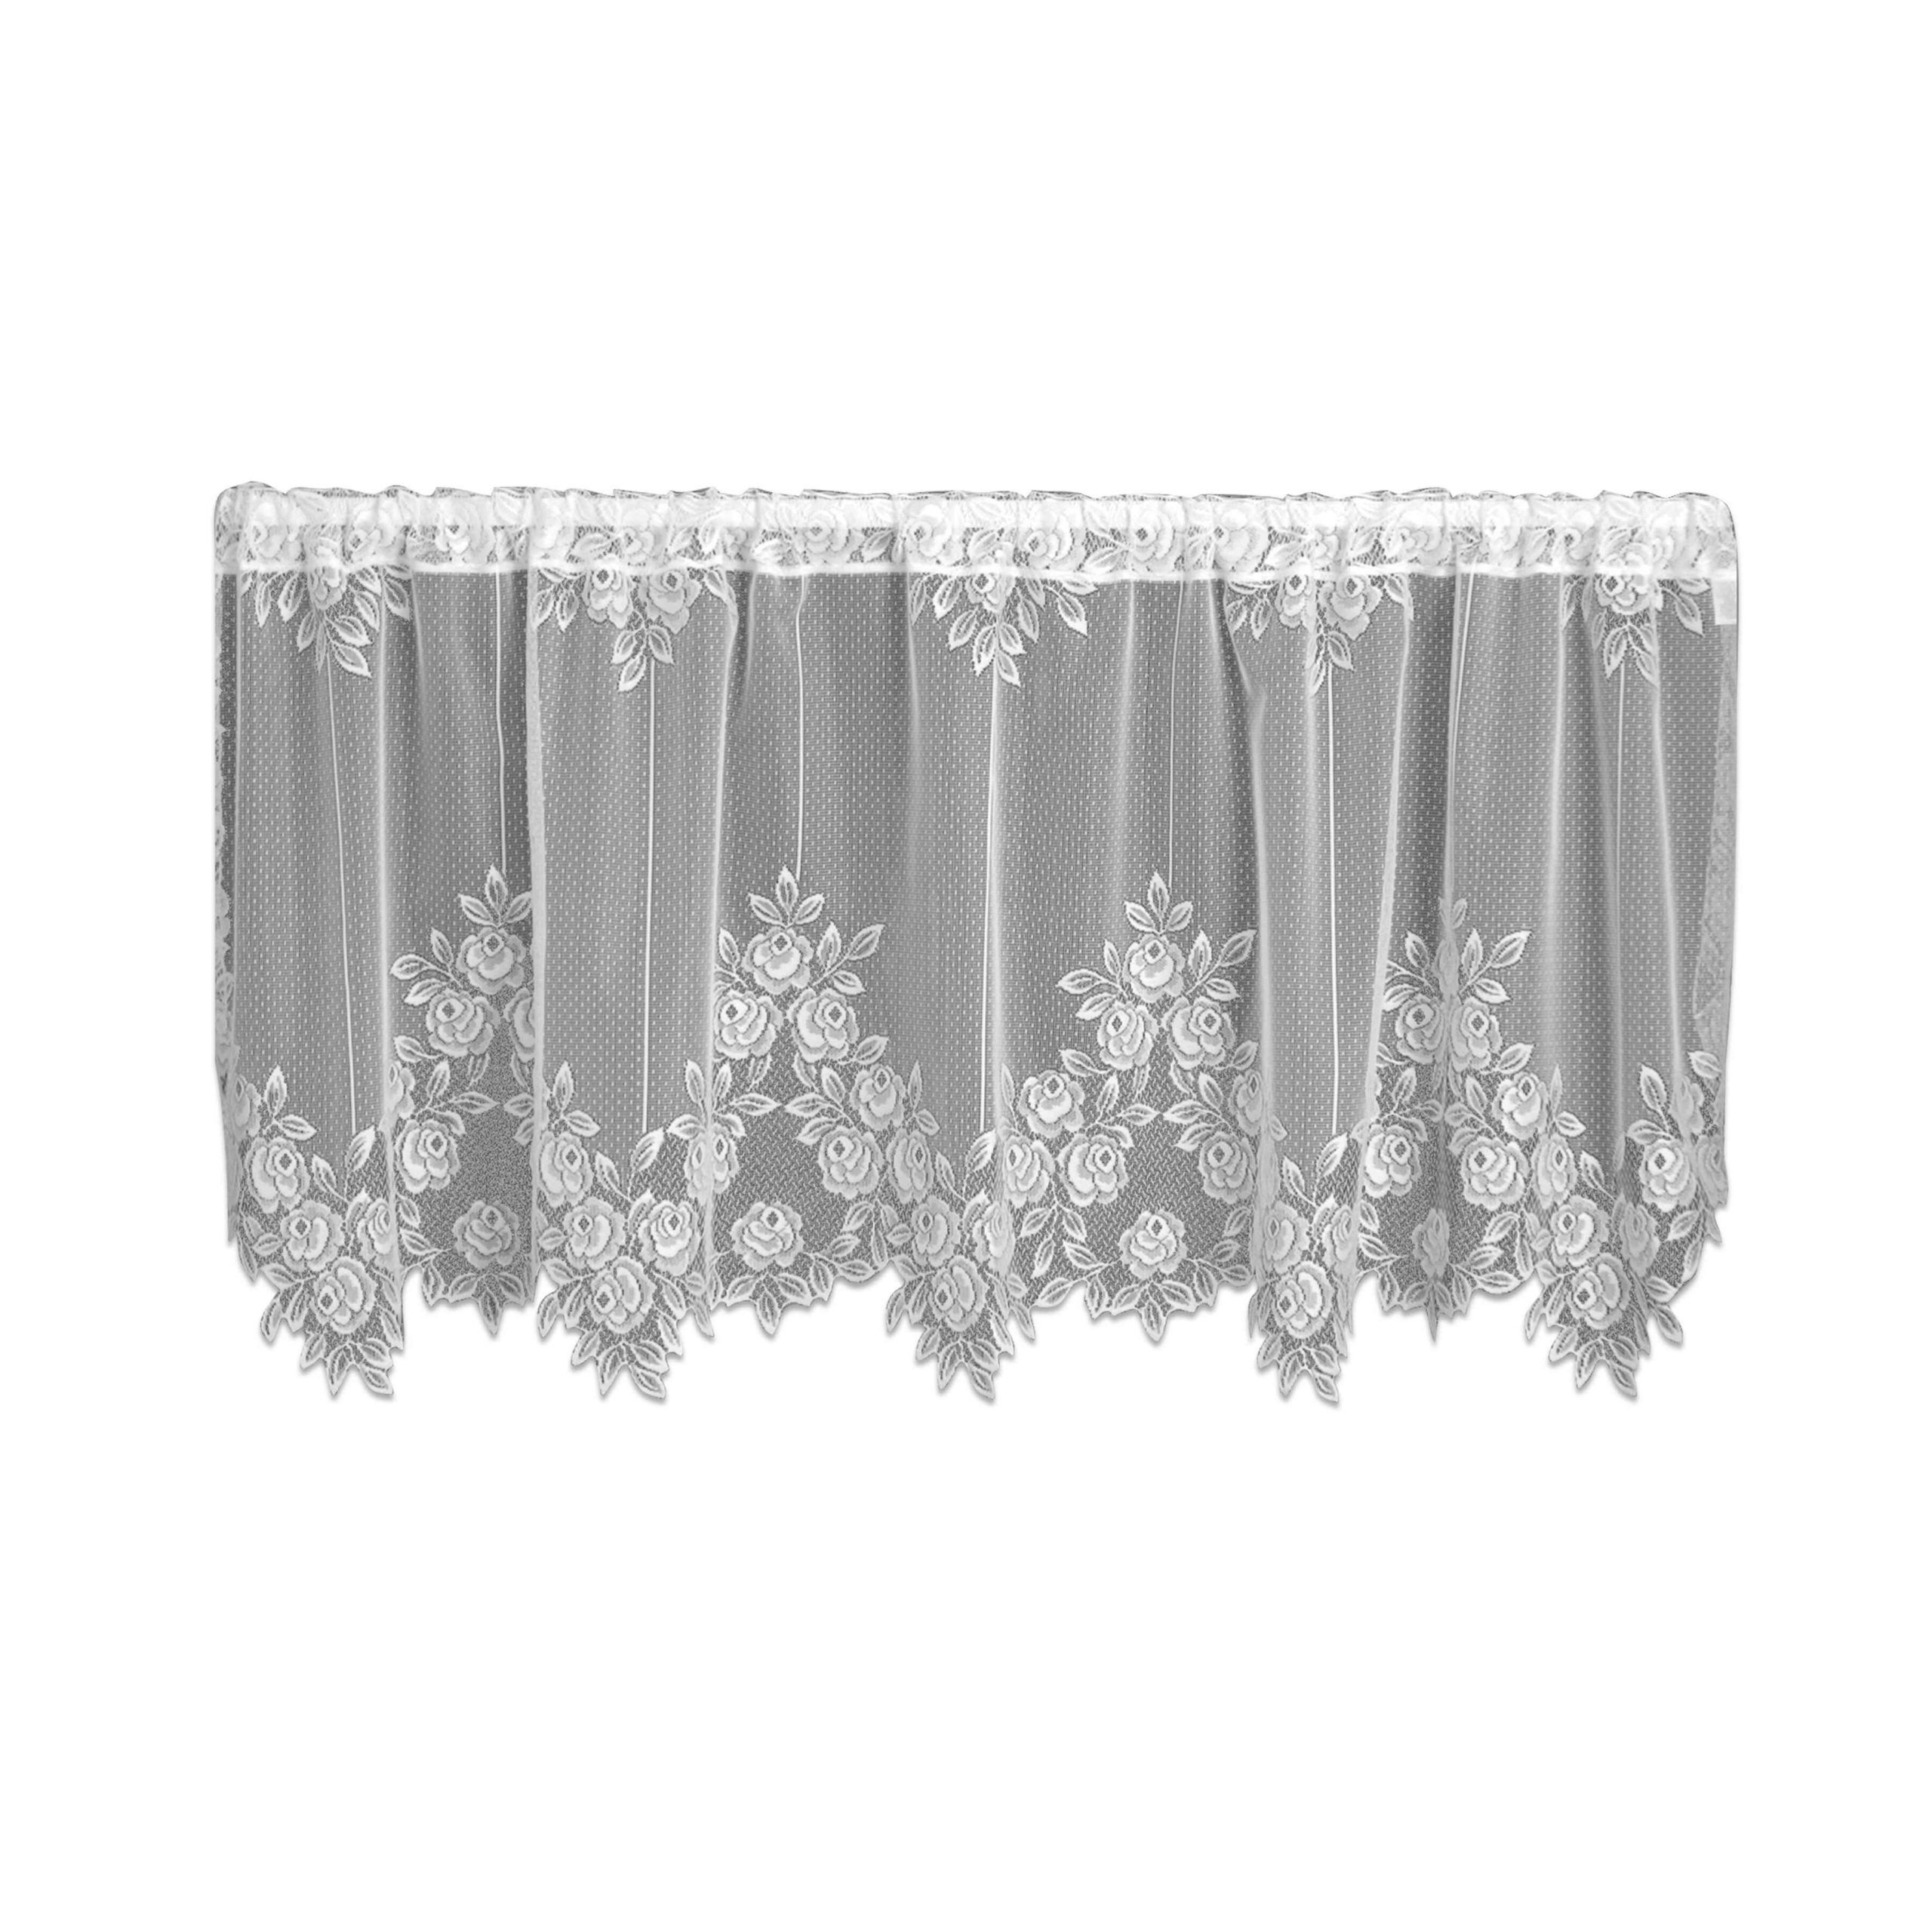 Appealing Lace Curtain Valances And Tiers Ideas Kitchen Within Luxurious Kitchen Curtains Tiers, Shade Or Valances (View 18 of 20)